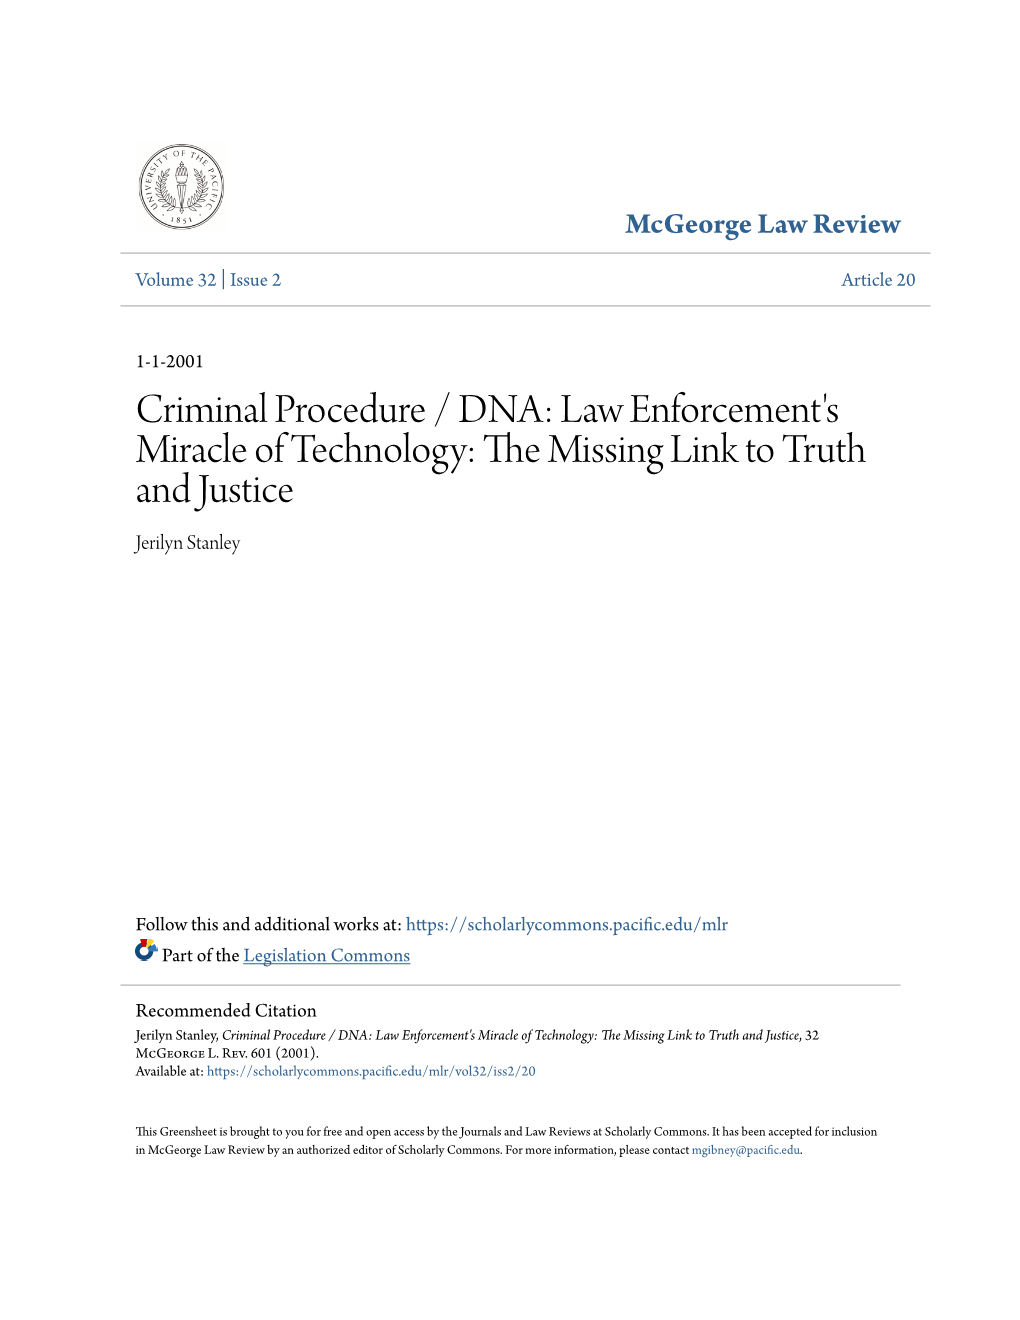 Criminal Procedure / DNA: Law Enforcement's Miracle of Technology: the Im Ssing Link to Truth and Justice Jerilyn Stanley